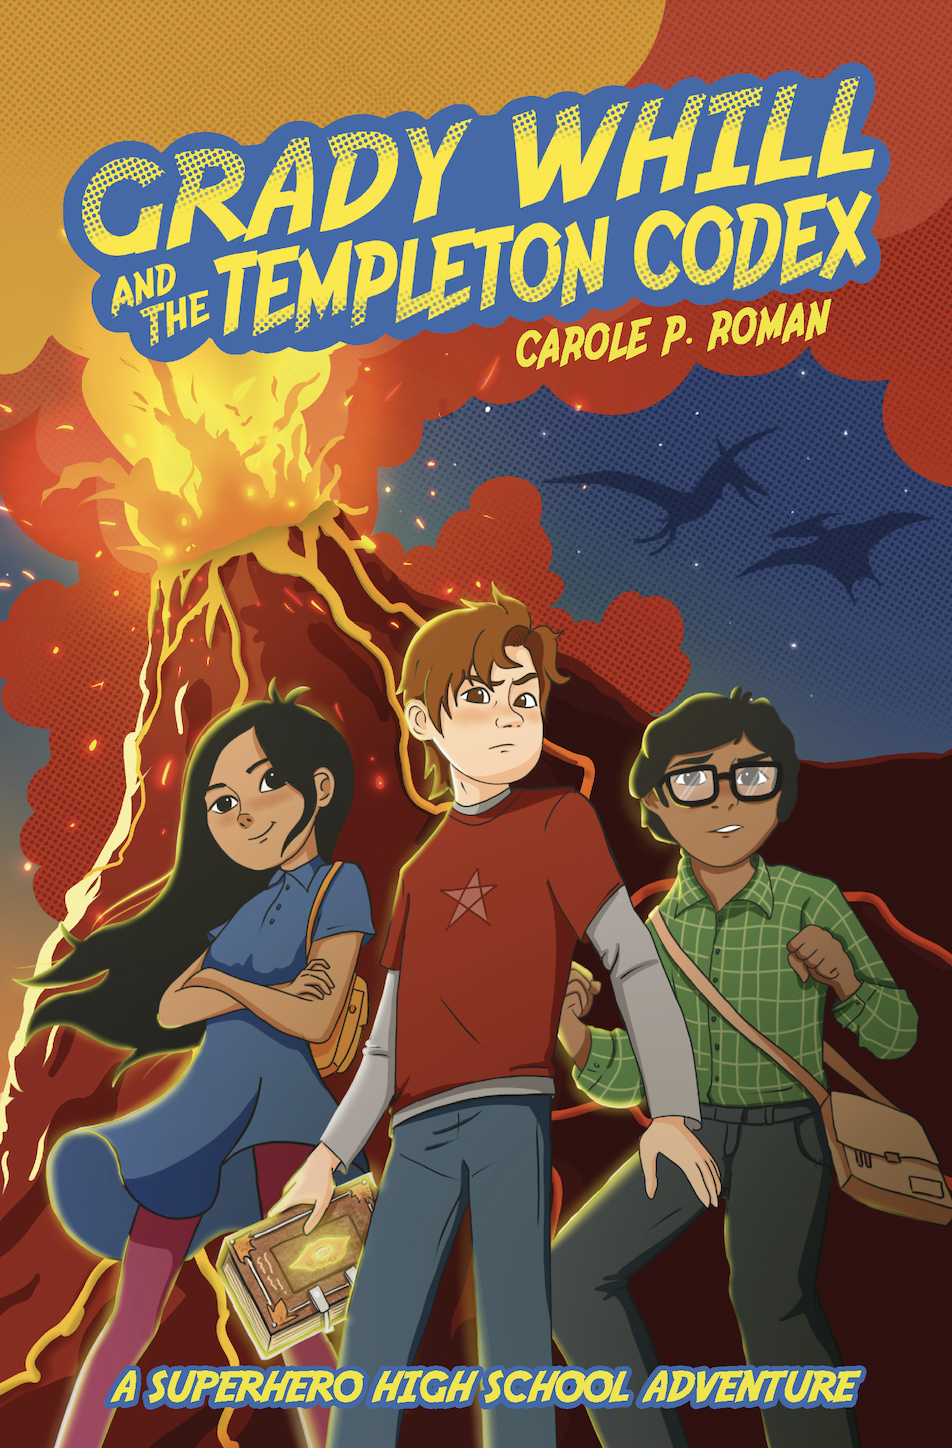 Grady Whill and the Templeton Codex by Carole P. Roman